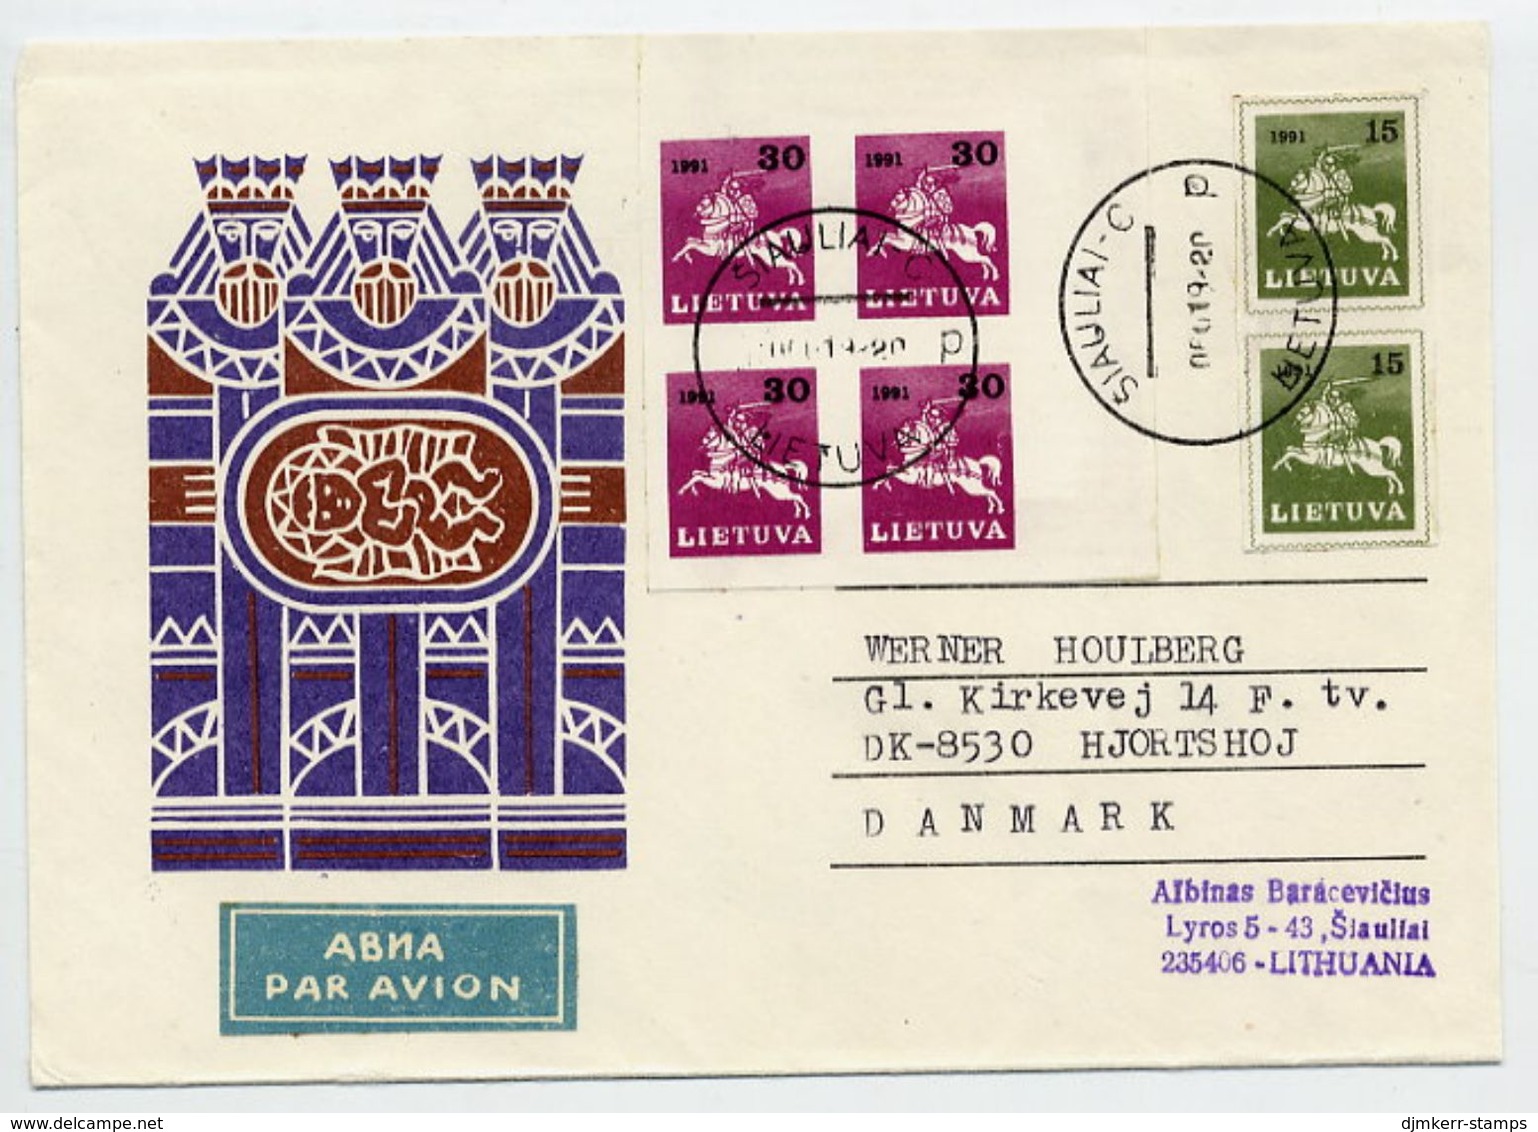 LITHUANIA 1991 Airmail Cover, Used To Denmark.  Michel 472, 481 - Lithuania